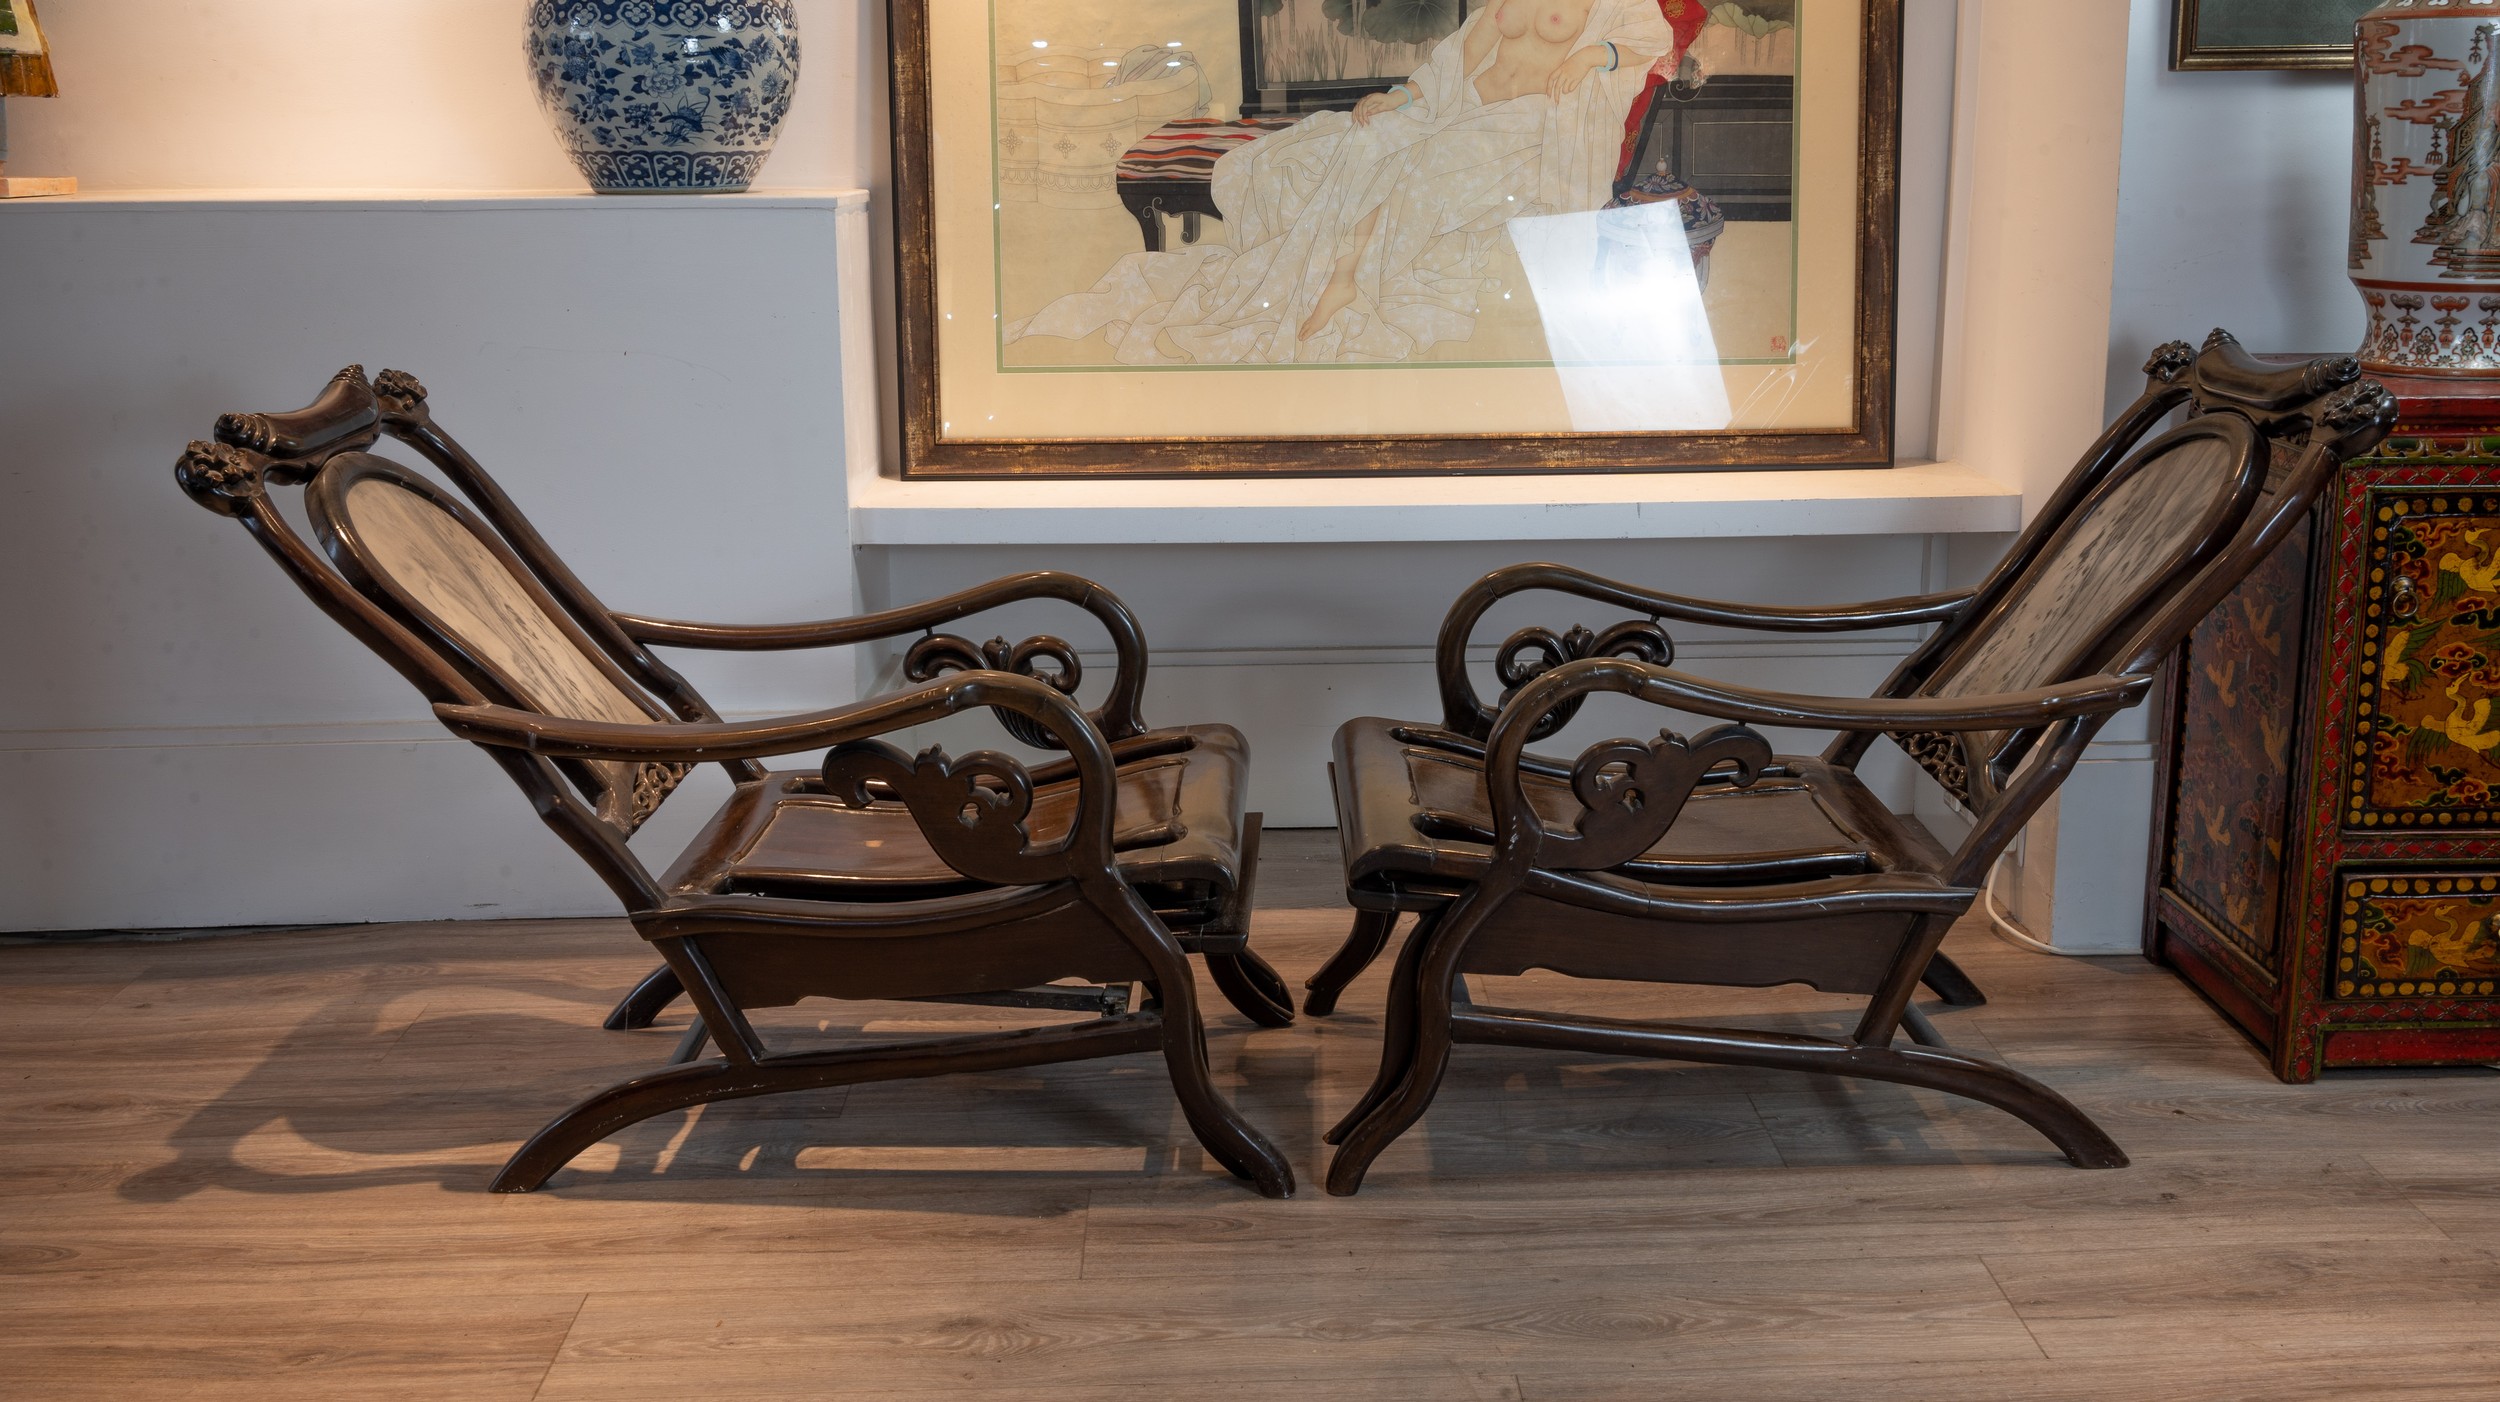 PAIR OF 20TH CENTURY CHINESE HARDWOOD 'MOON GAZING' CHAIRS, With floral carved headrests, Dali - Image 6 of 6